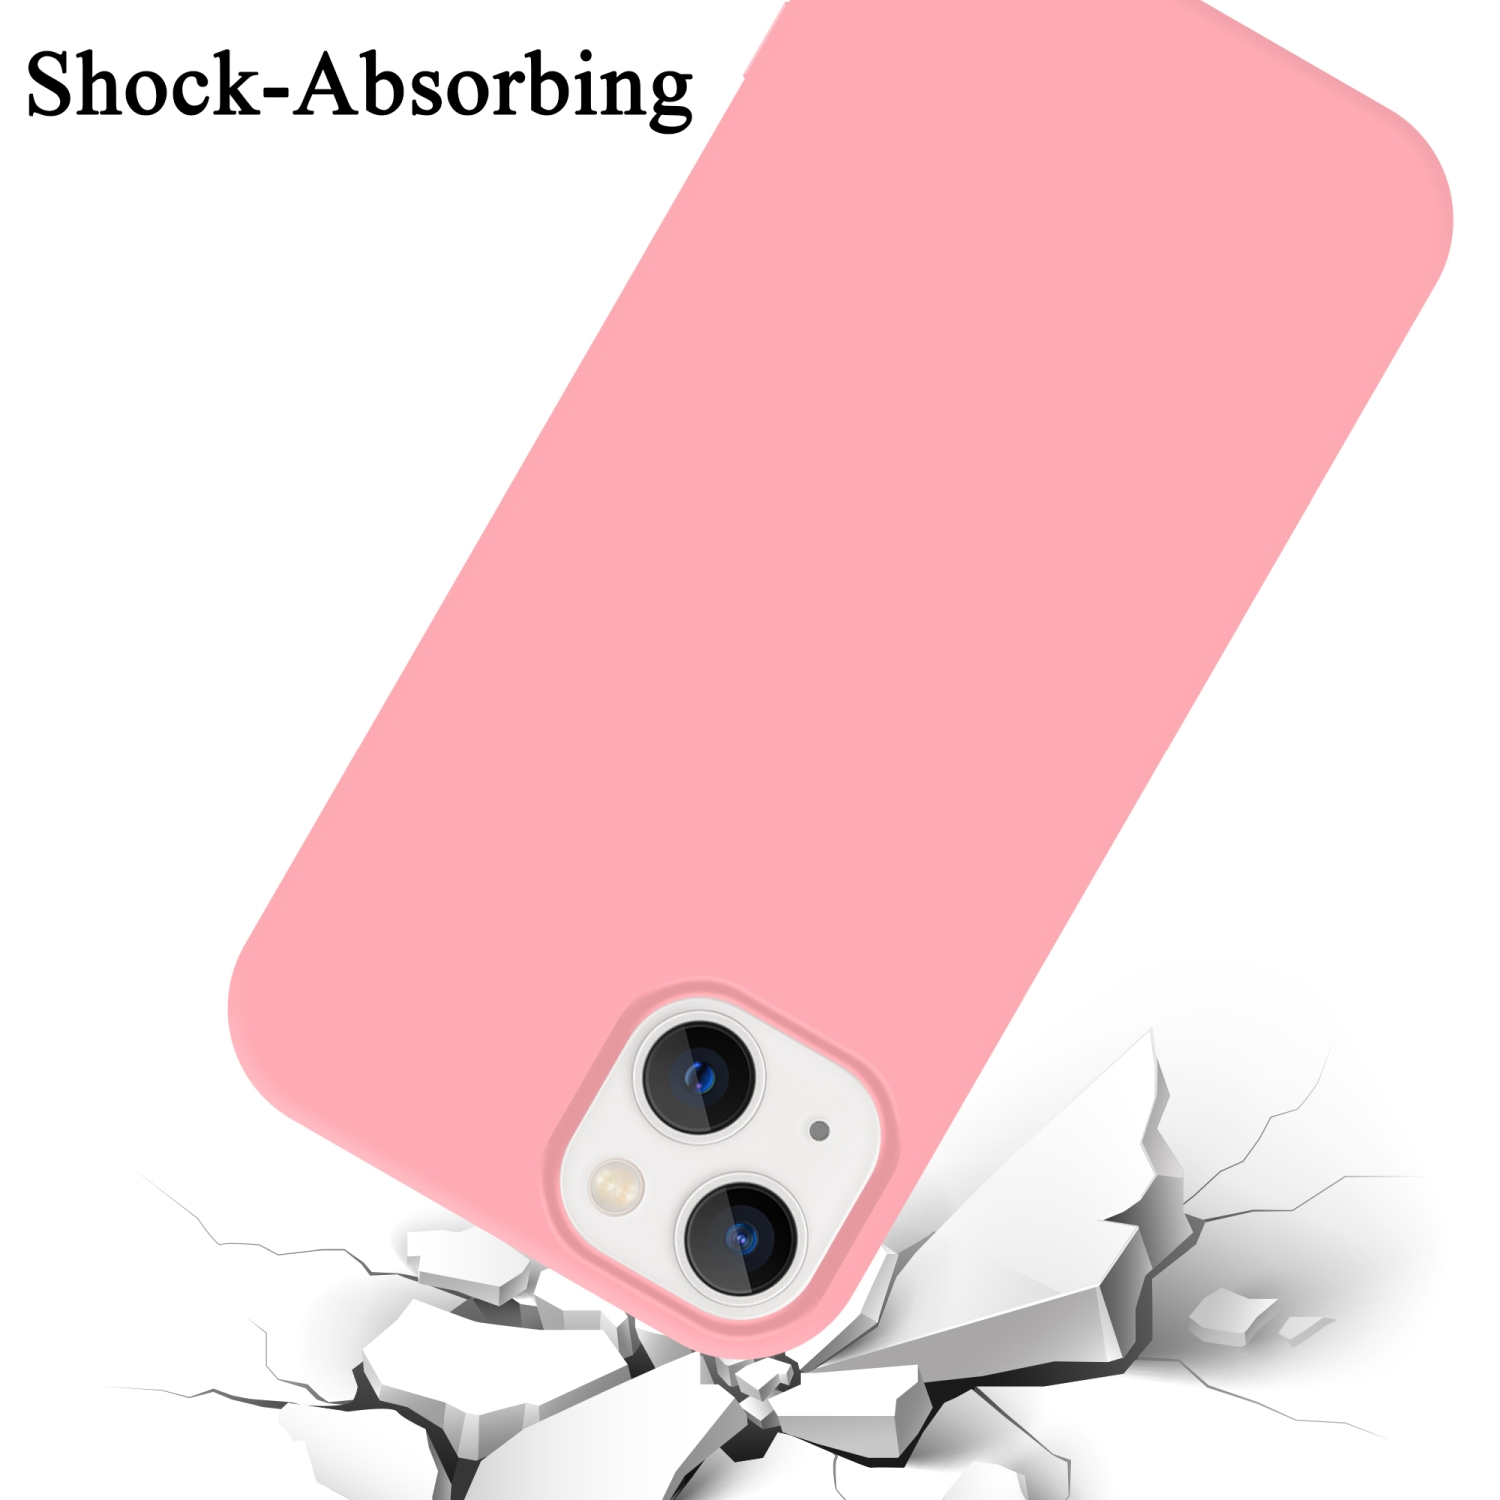 Hülle Silicone im iPhone PLUS, PINK 14 Apple, LIQUID Liquid CADORABO Style, Backcover, Case